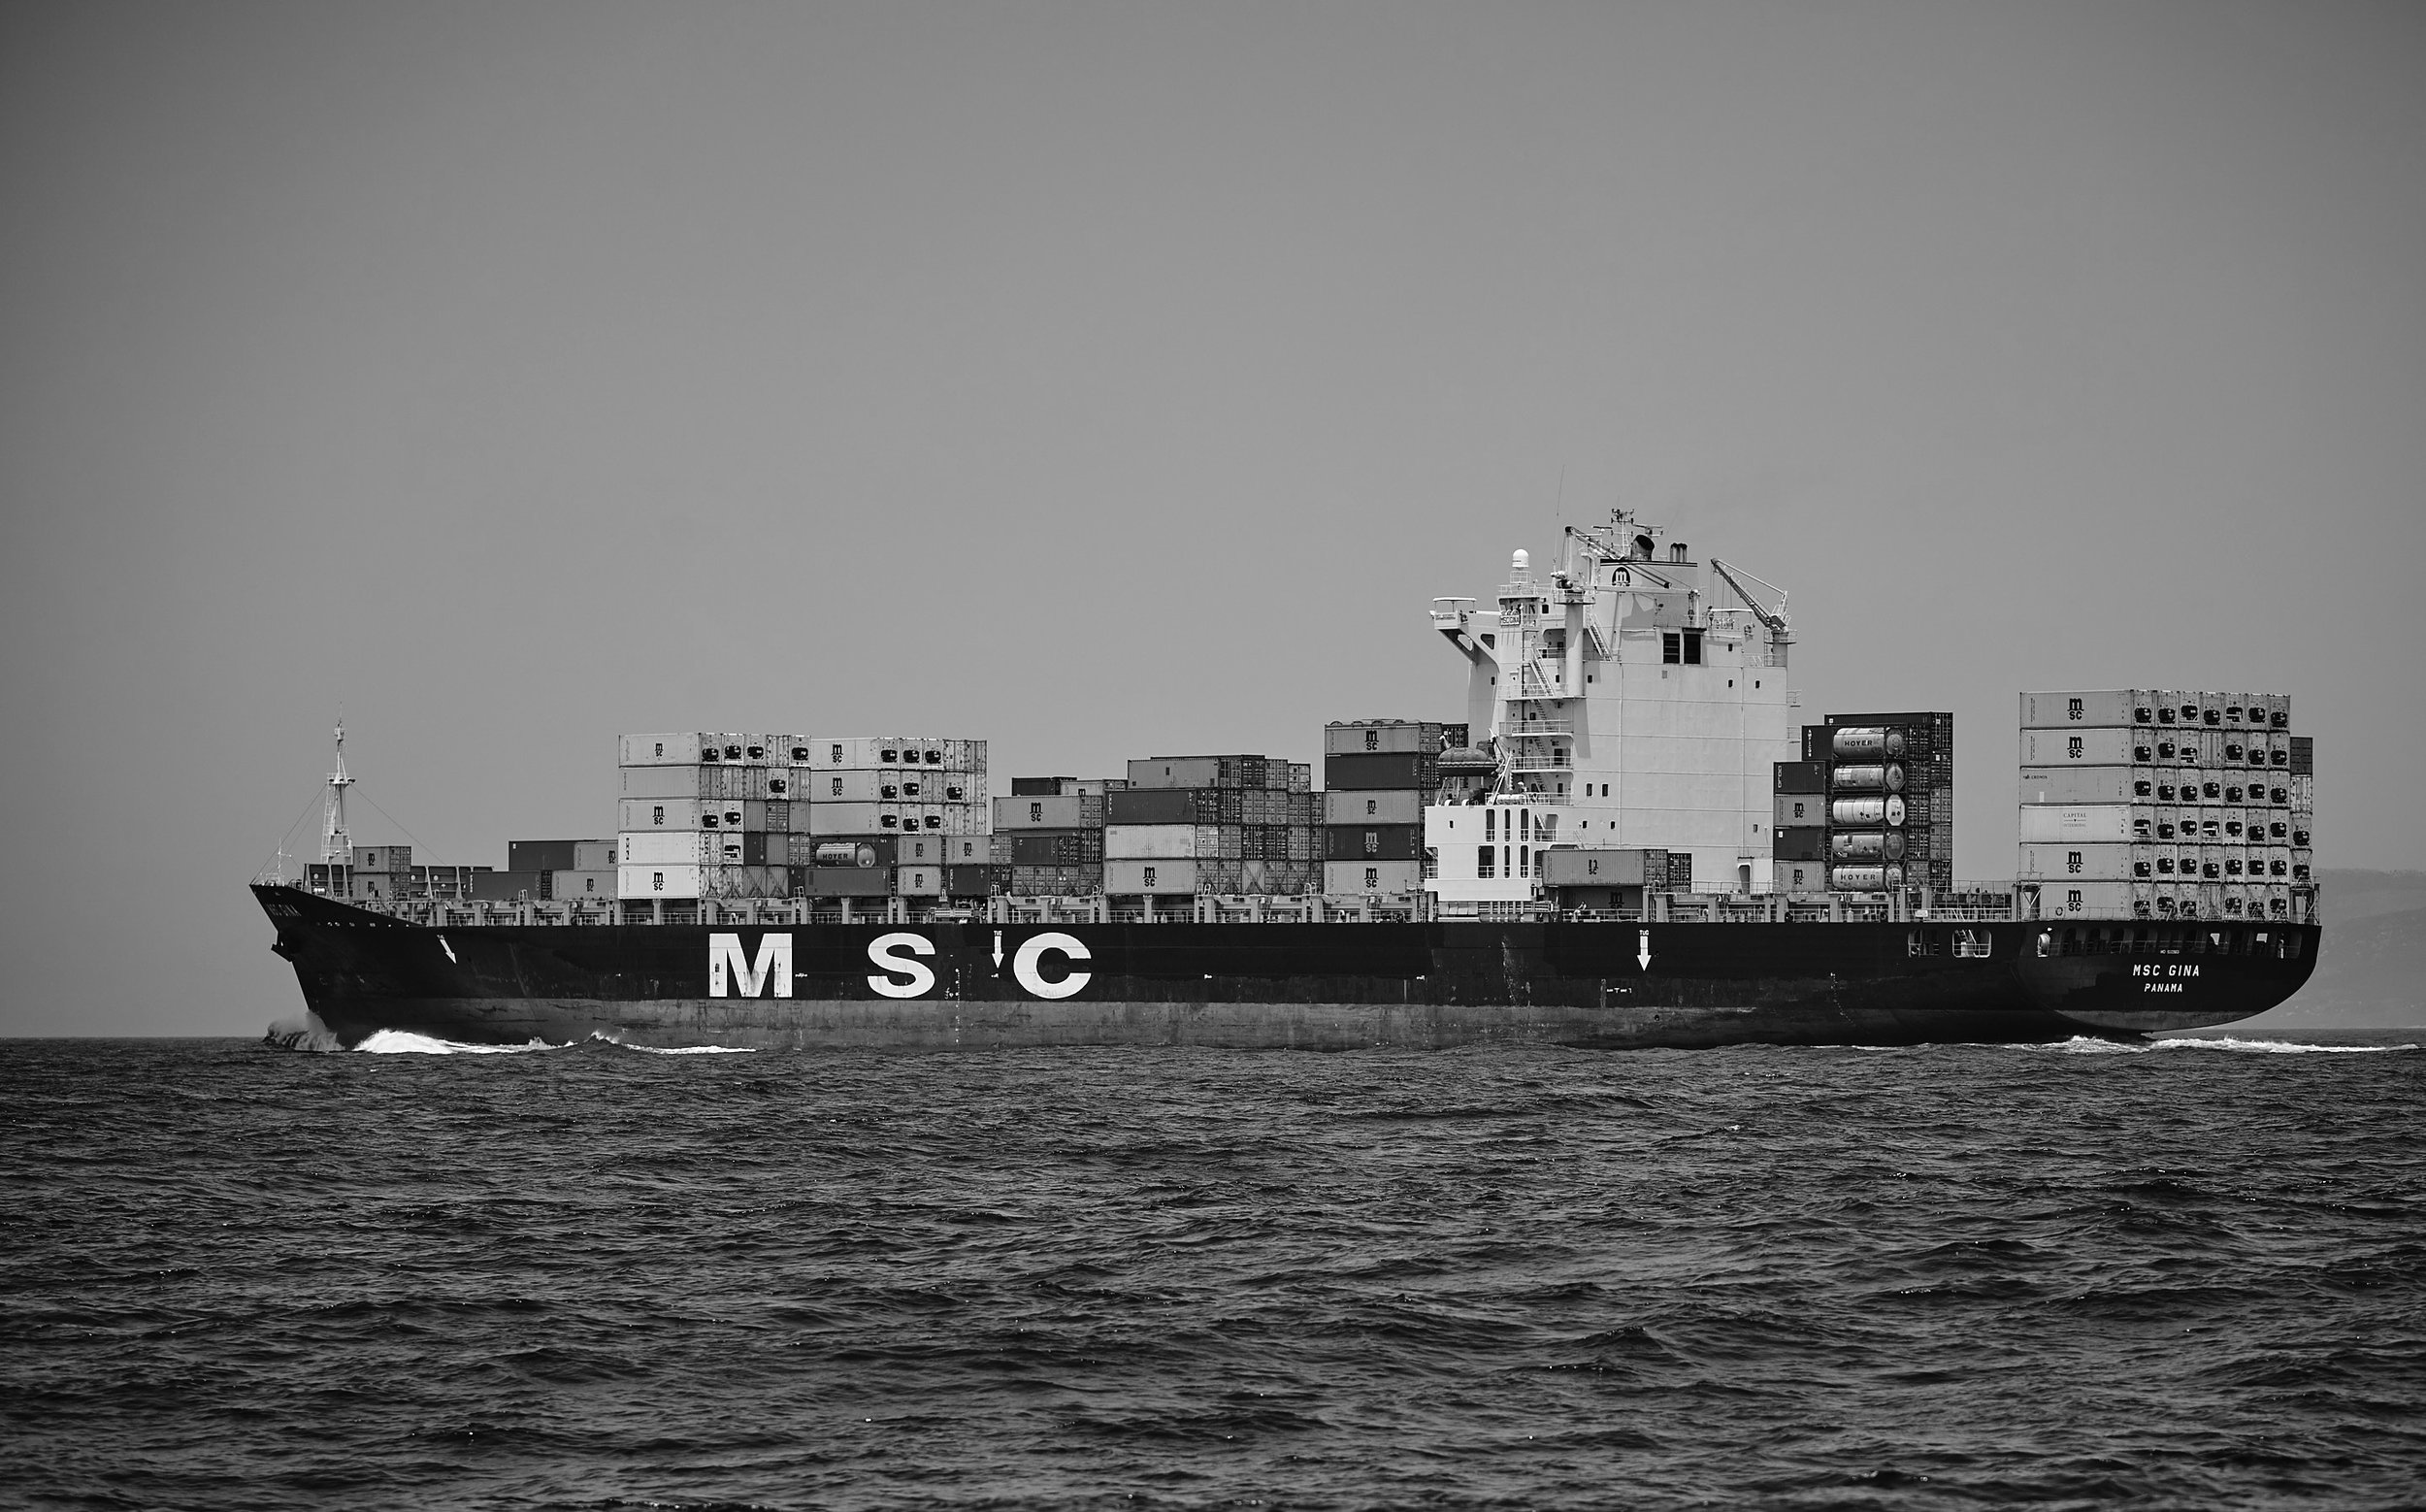 A container ship on the ocean, seen from the side